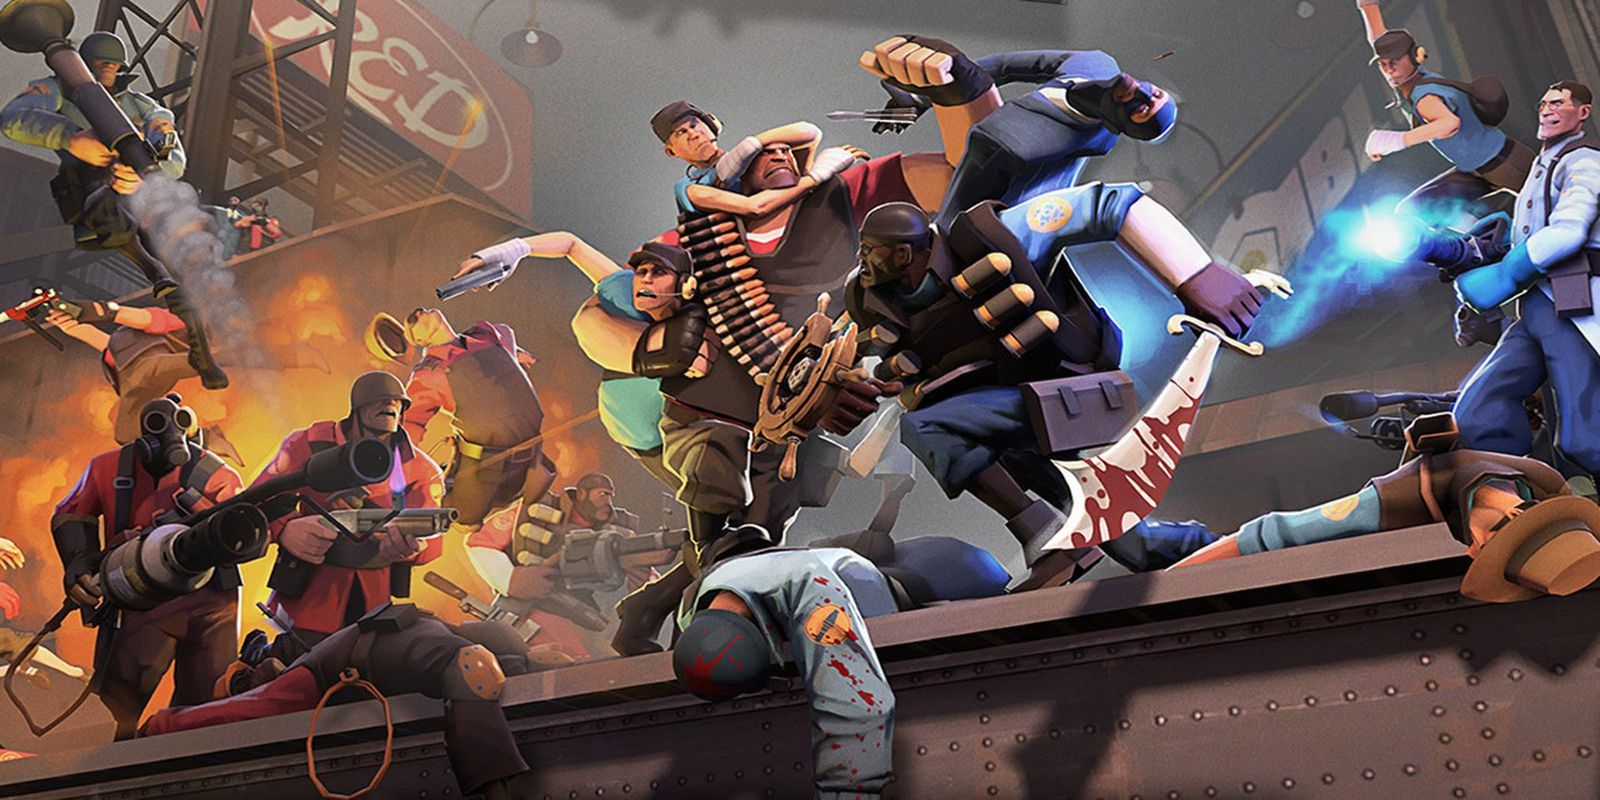 An image of cartoony characters from Team Fortress 2 brawling in a scene of mayhem.